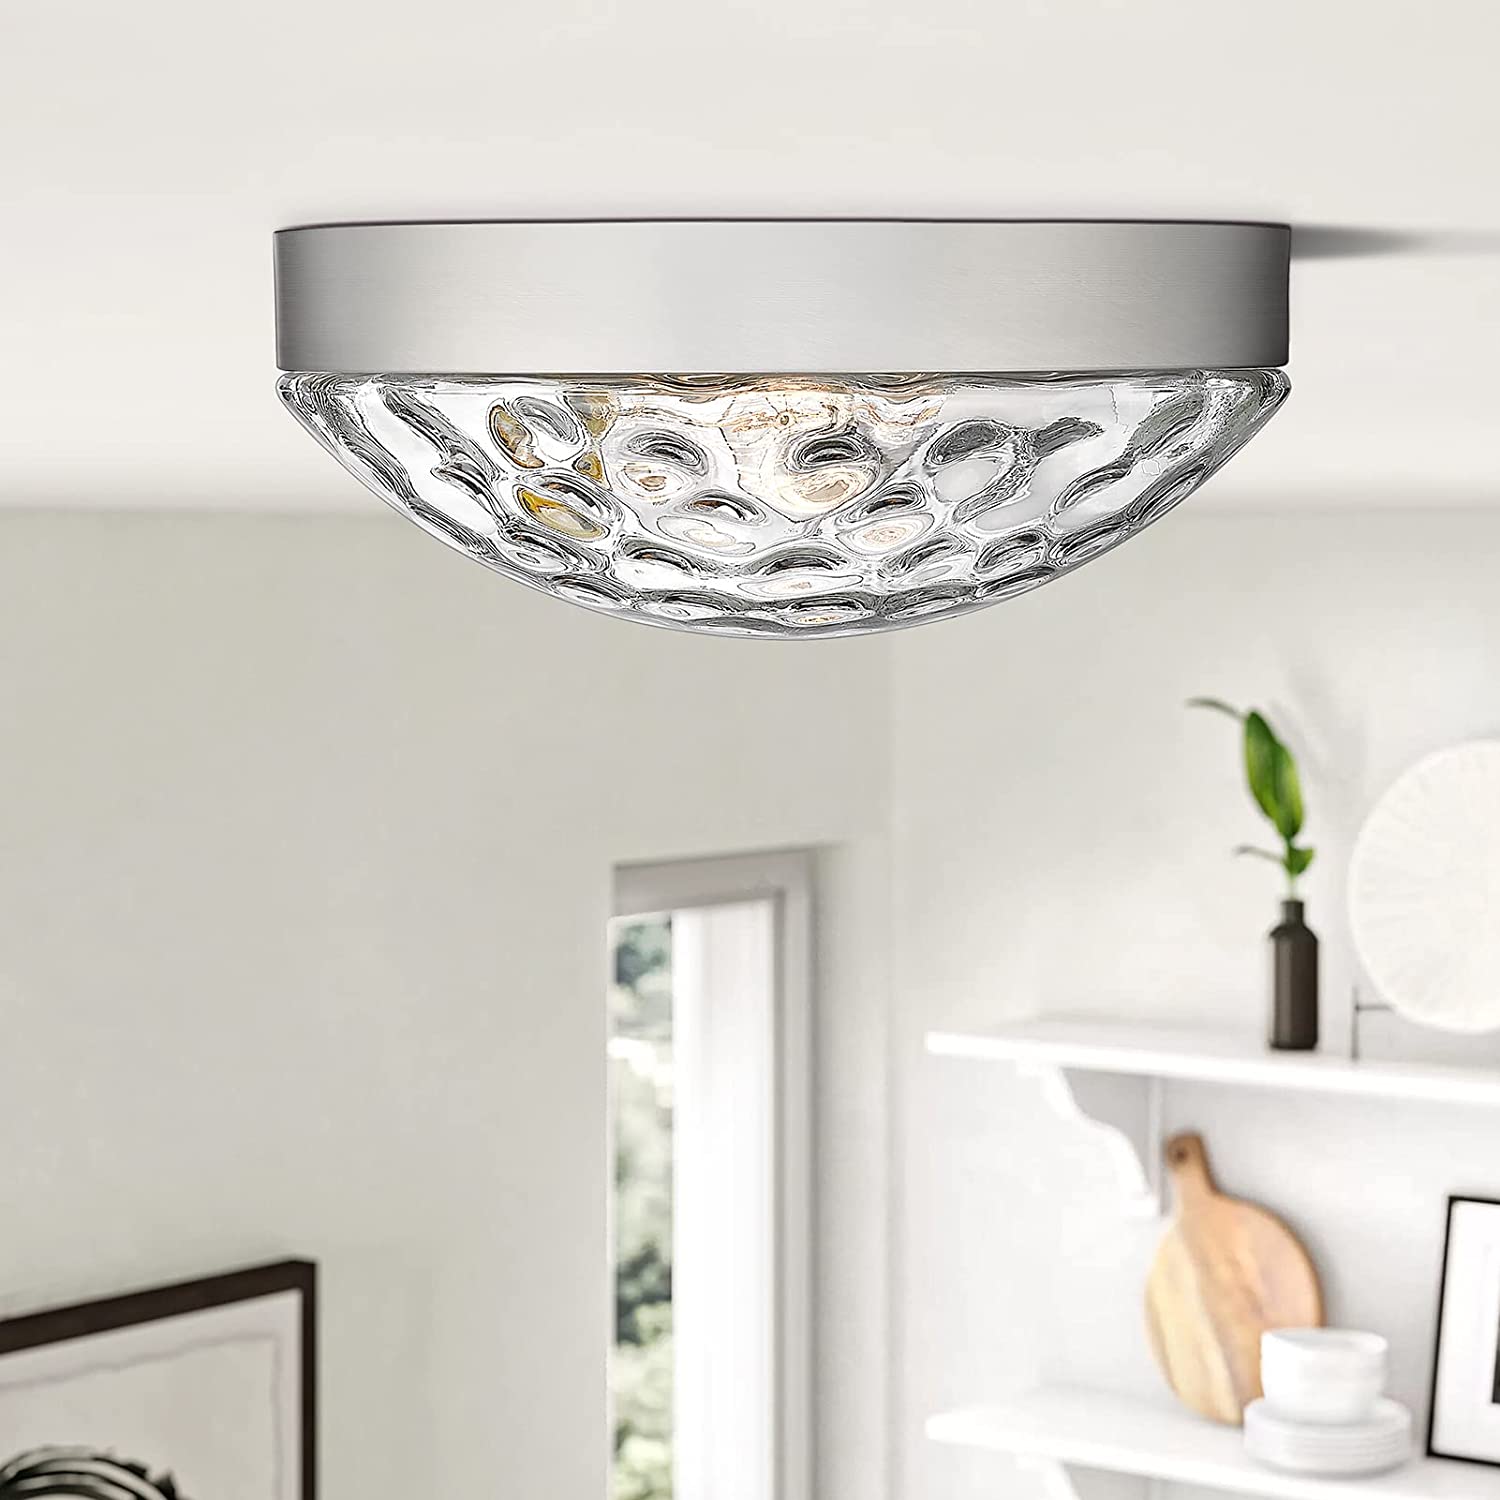 2 light close to ceiling light fixture industrial flush mount ceiling lighting with nickel finish